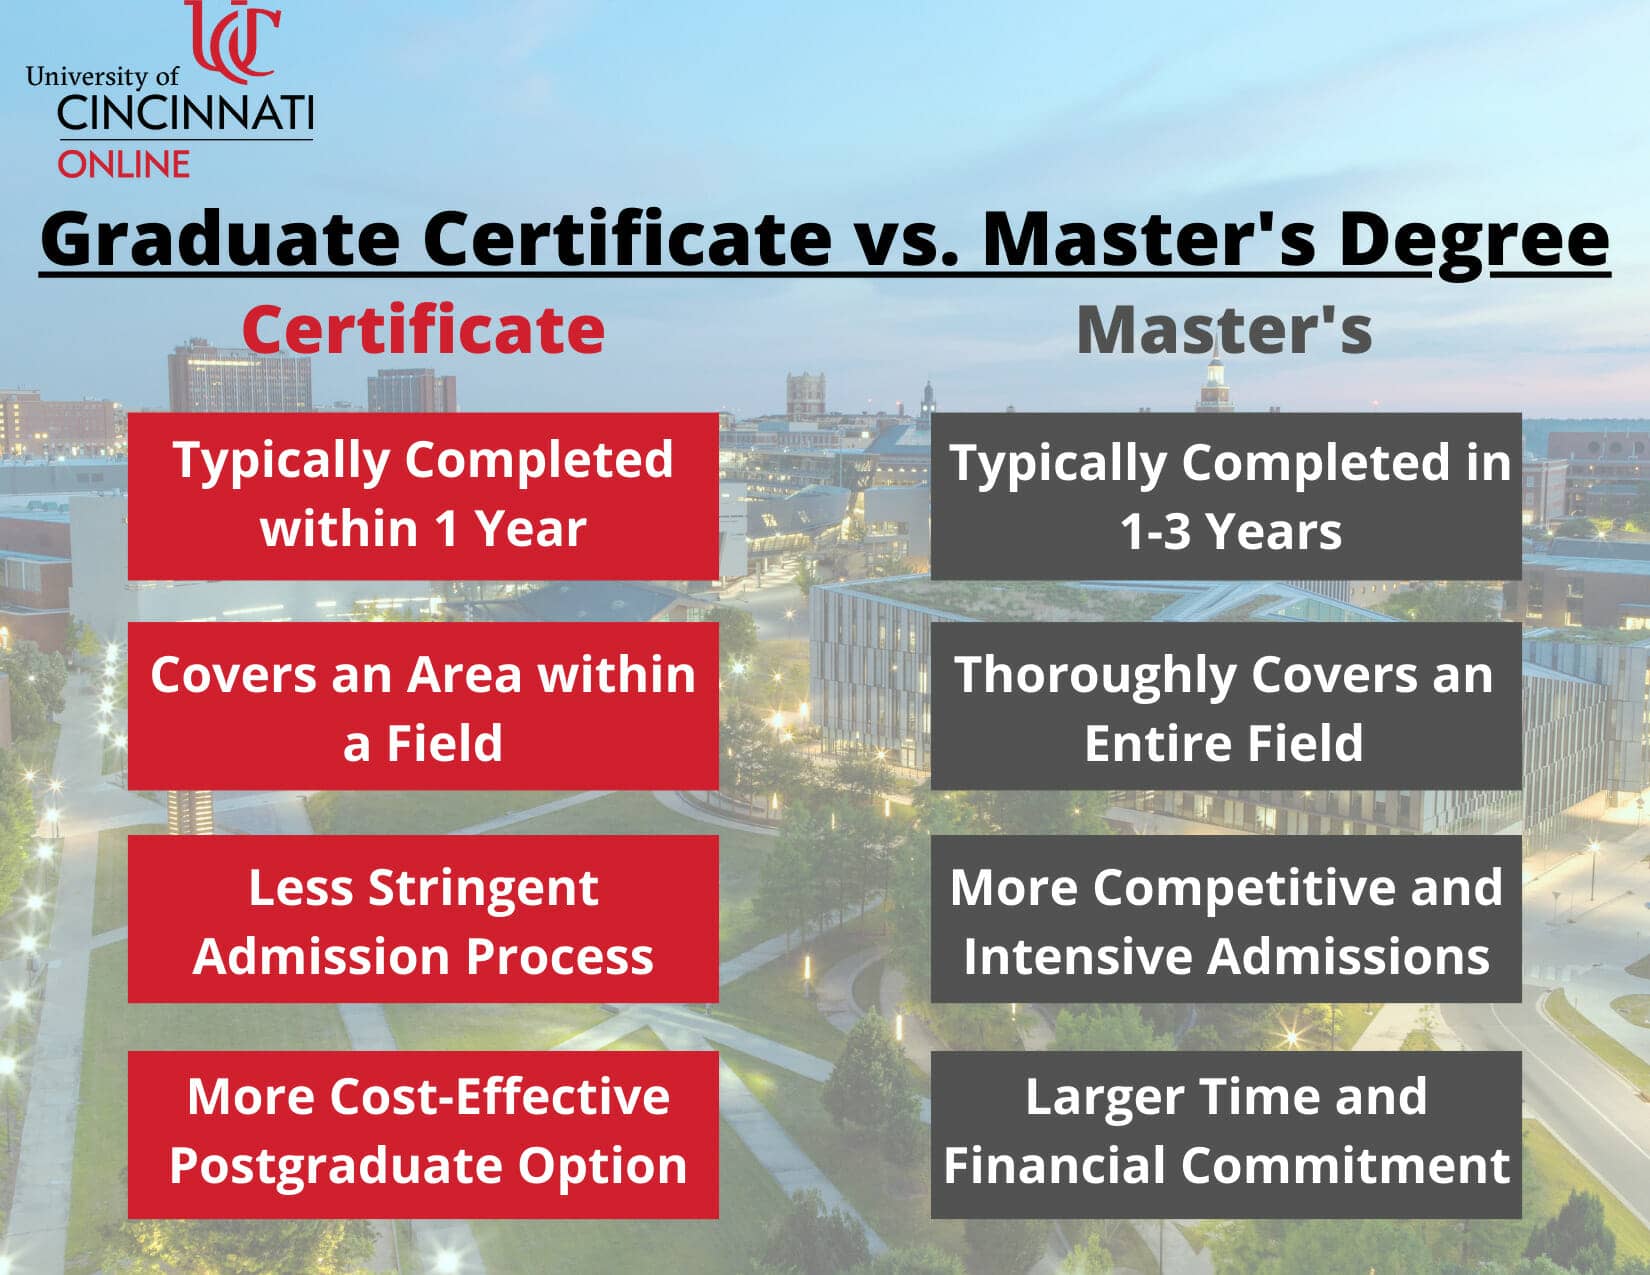 Graphic showing the high-level differences between a graduate certificate and a master's degree